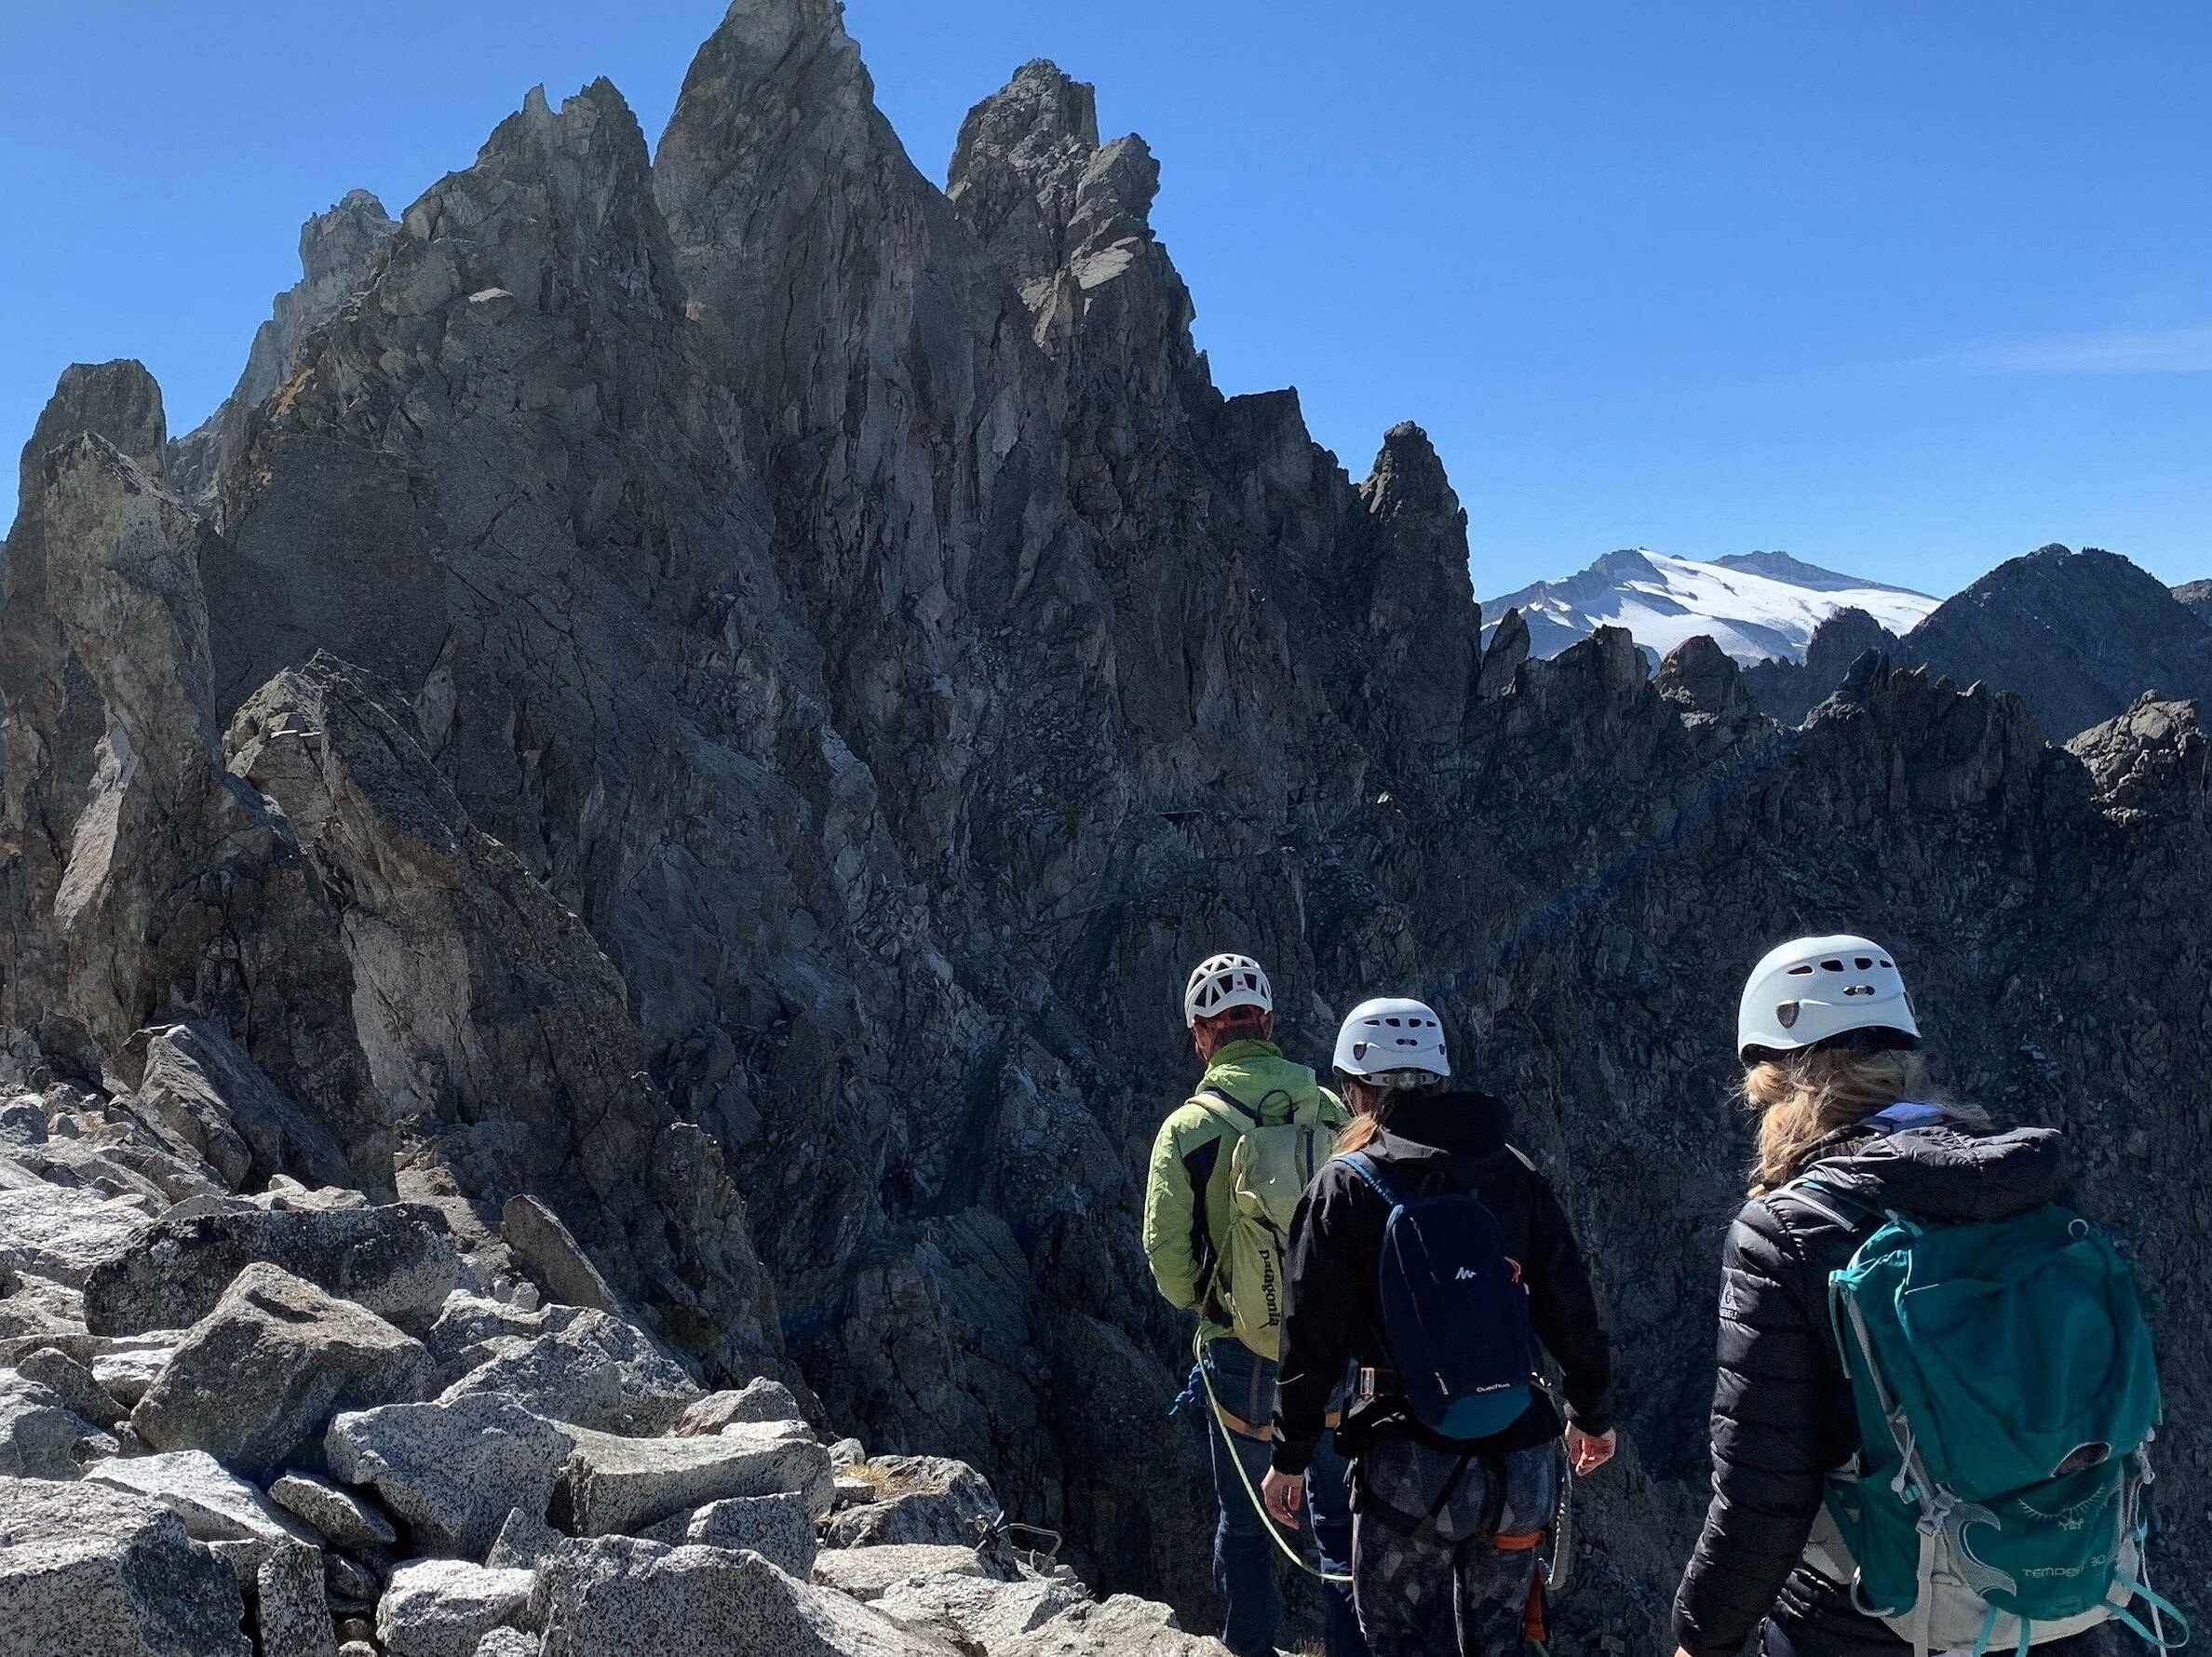 Book your next 4,000m European peak adventure before 15.09.21 and receive a free training weekend, and training plan, in the UK  © No Boundaries